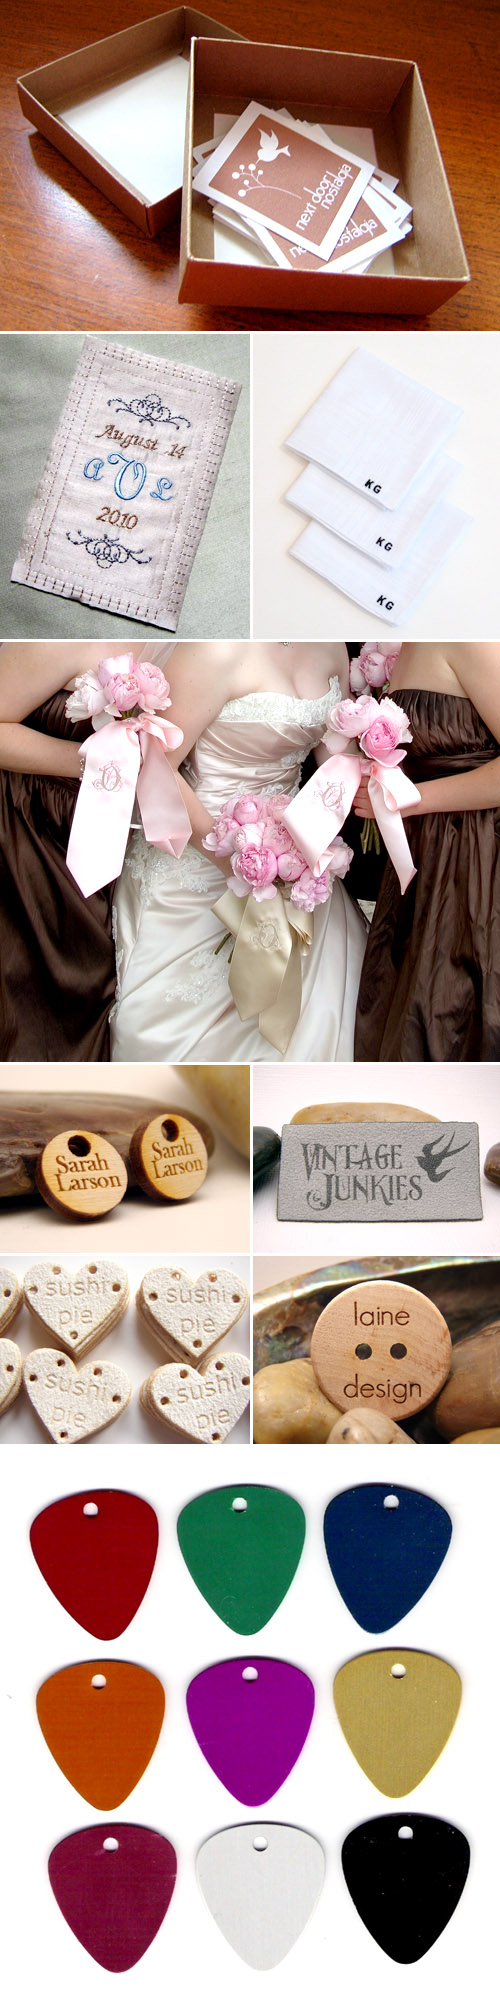 custom printed personalized wedding dress and labels and wedding favor tags from etsy.com